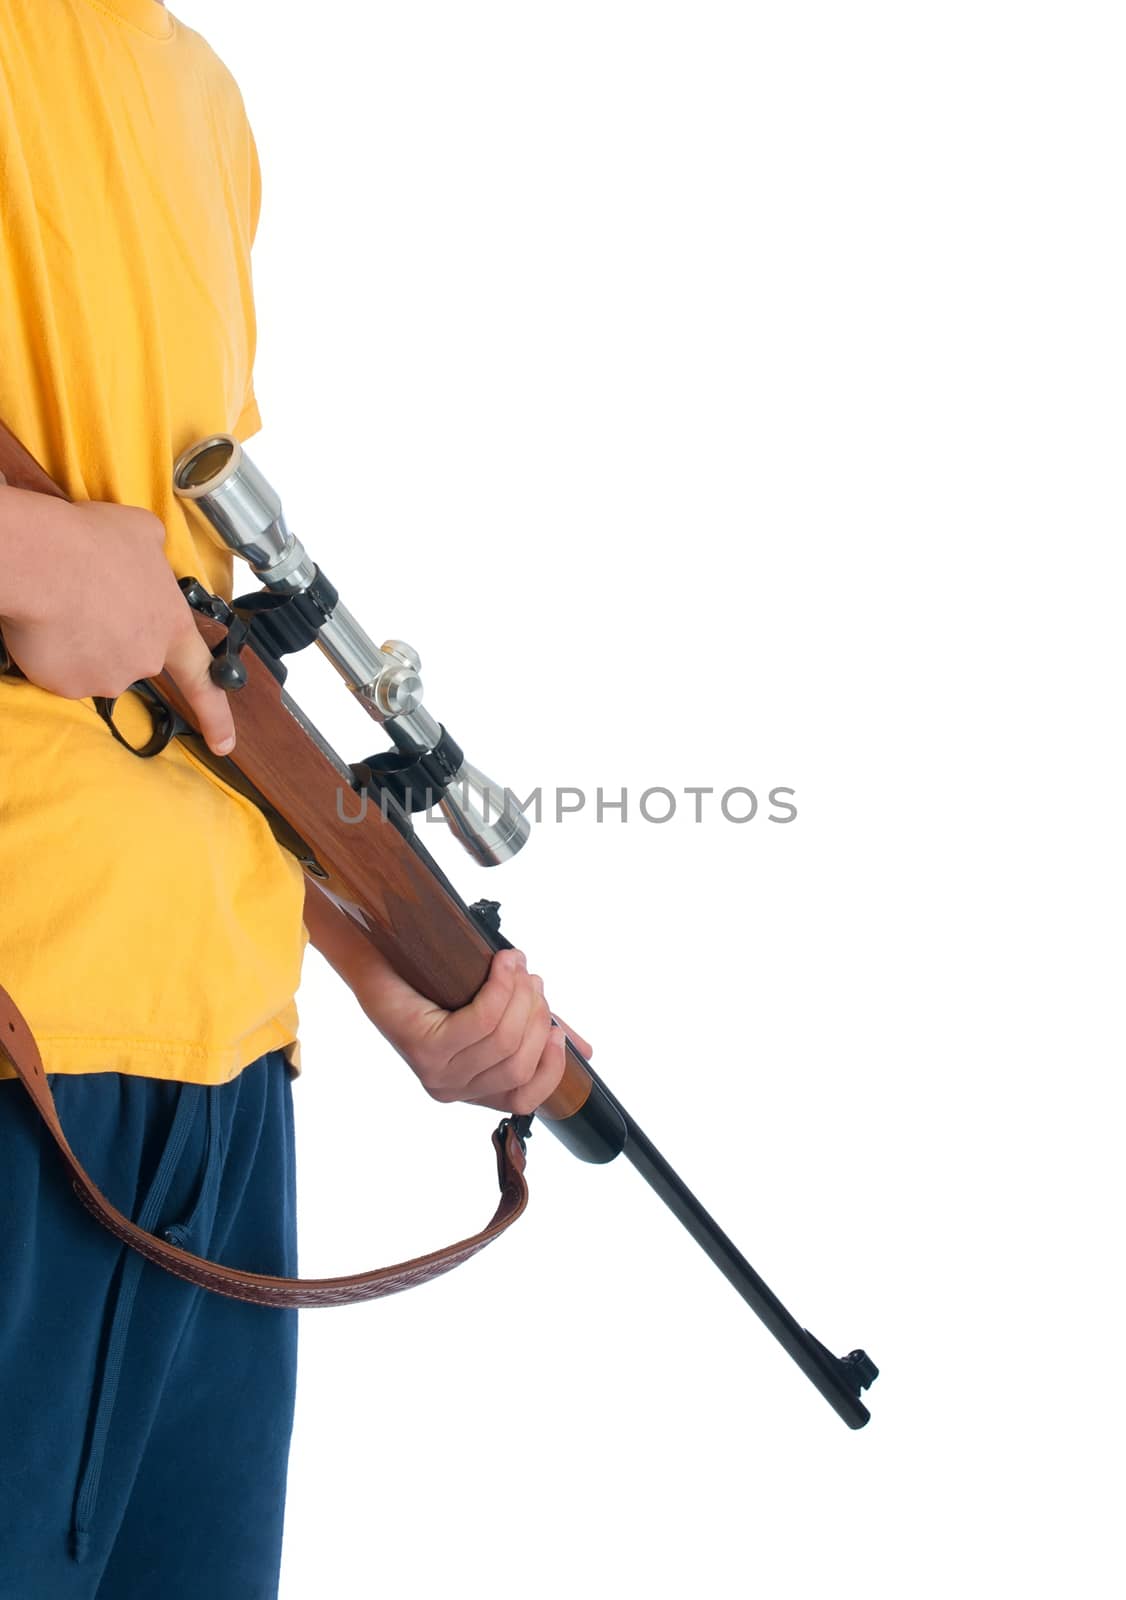 Young man holding a high power rifle with a scope. Isolated against a white background.